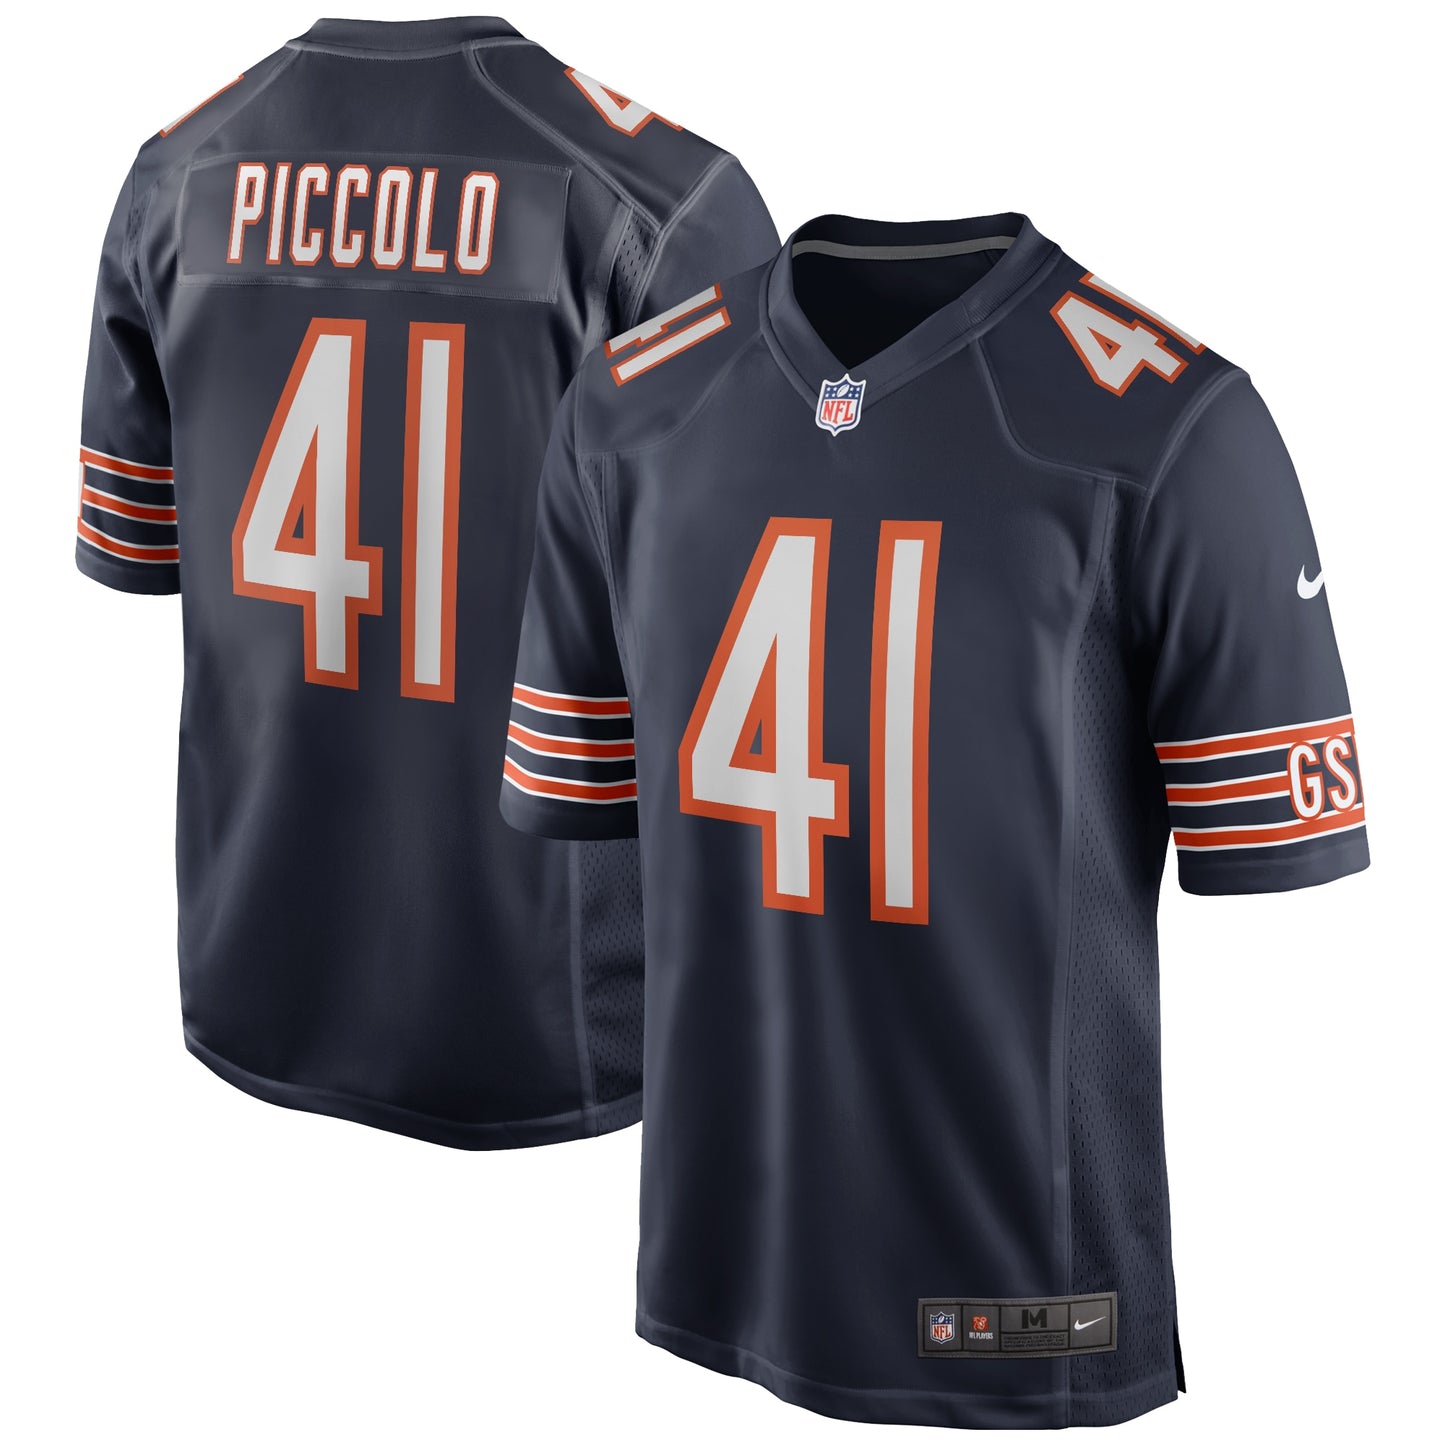 Brian Piccolo Chicago Bears Nike Game Retired Player Jersey - Navy